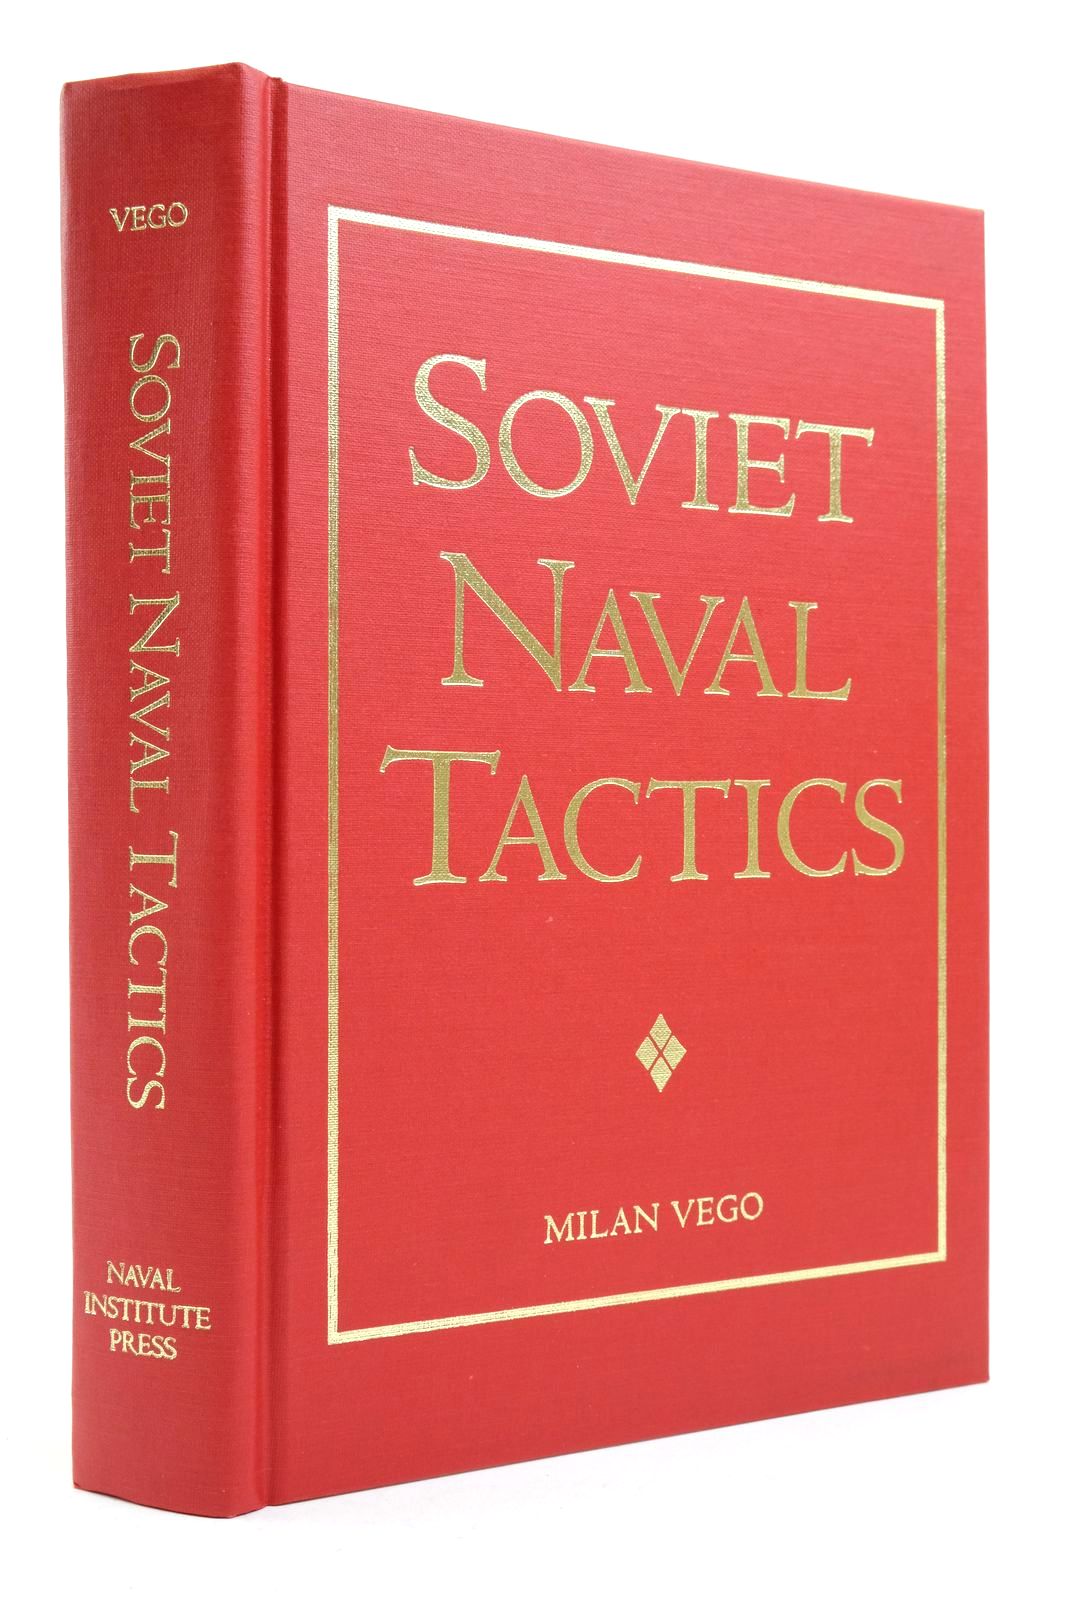 Photo of SOVIET NAVAL TACTICS written by Vego, Milan published by Naval Institute Press (STOCK CODE: 2138765)  for sale by Stella & Rose's Books